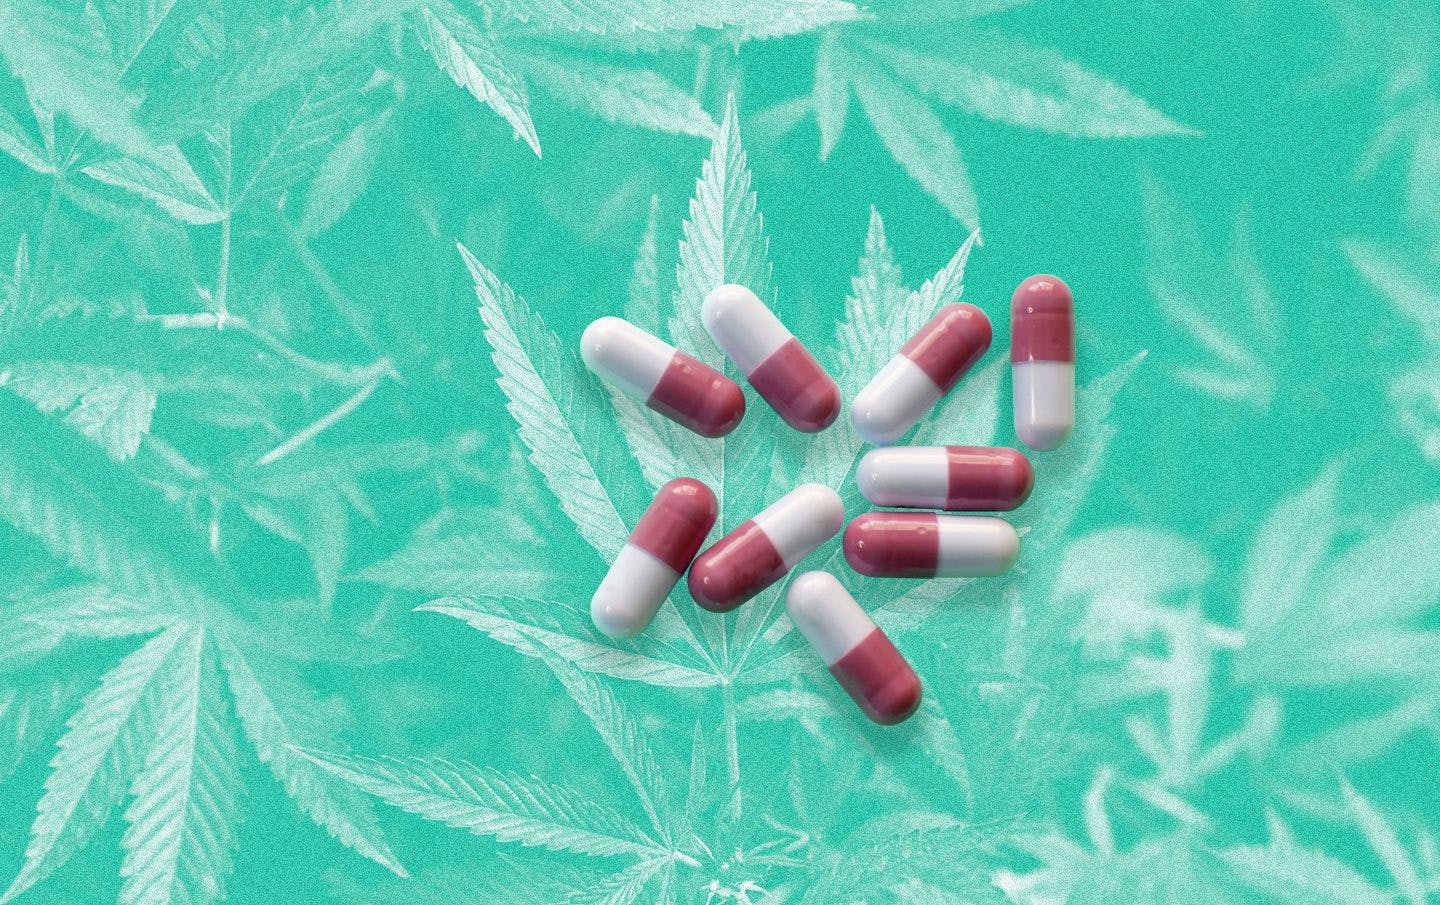 Could cannabis and cannabinoids be used to replace the need for addictive prescription medications?